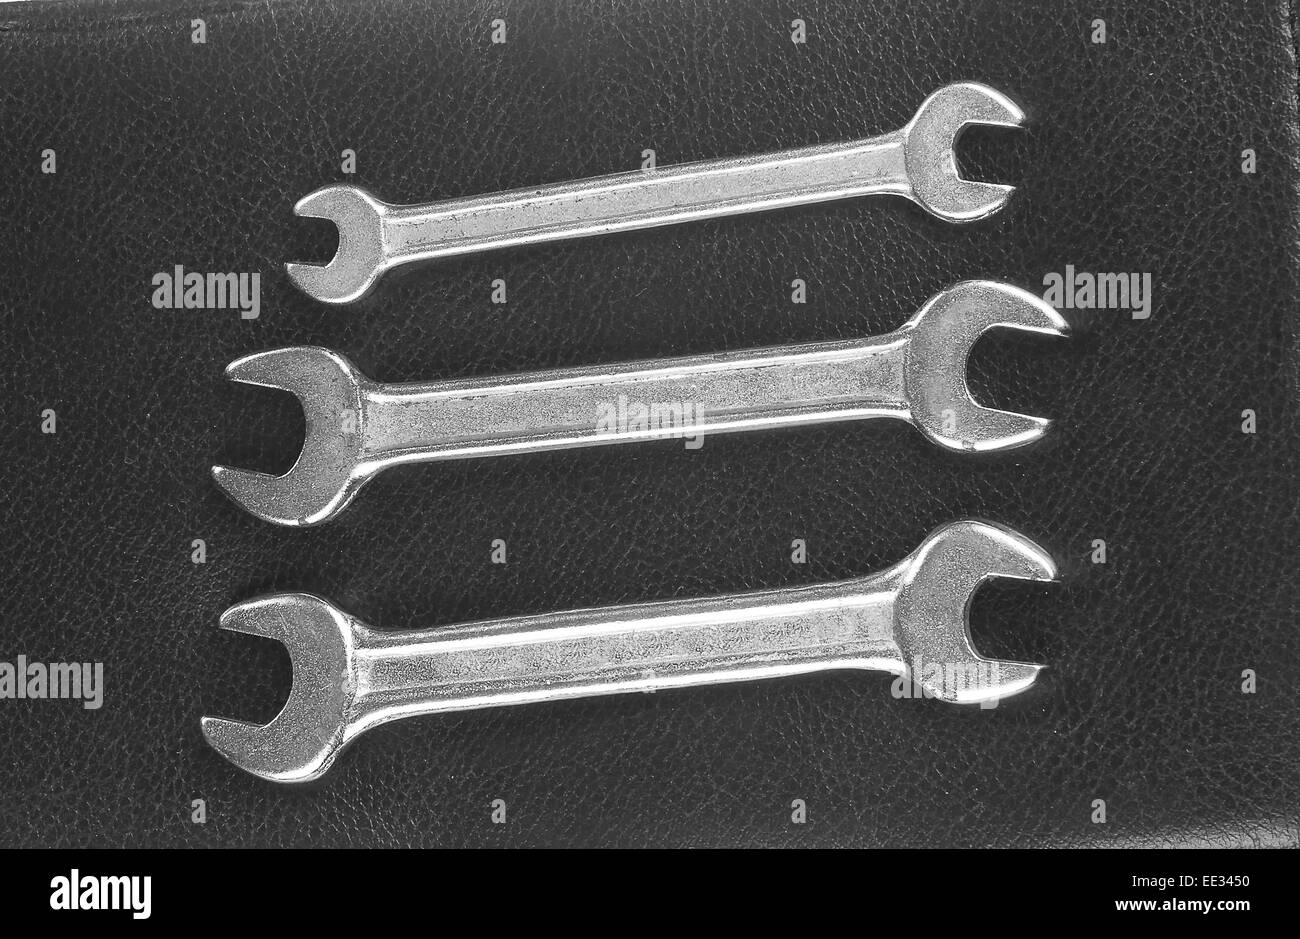 A set of spanners Stock Photo